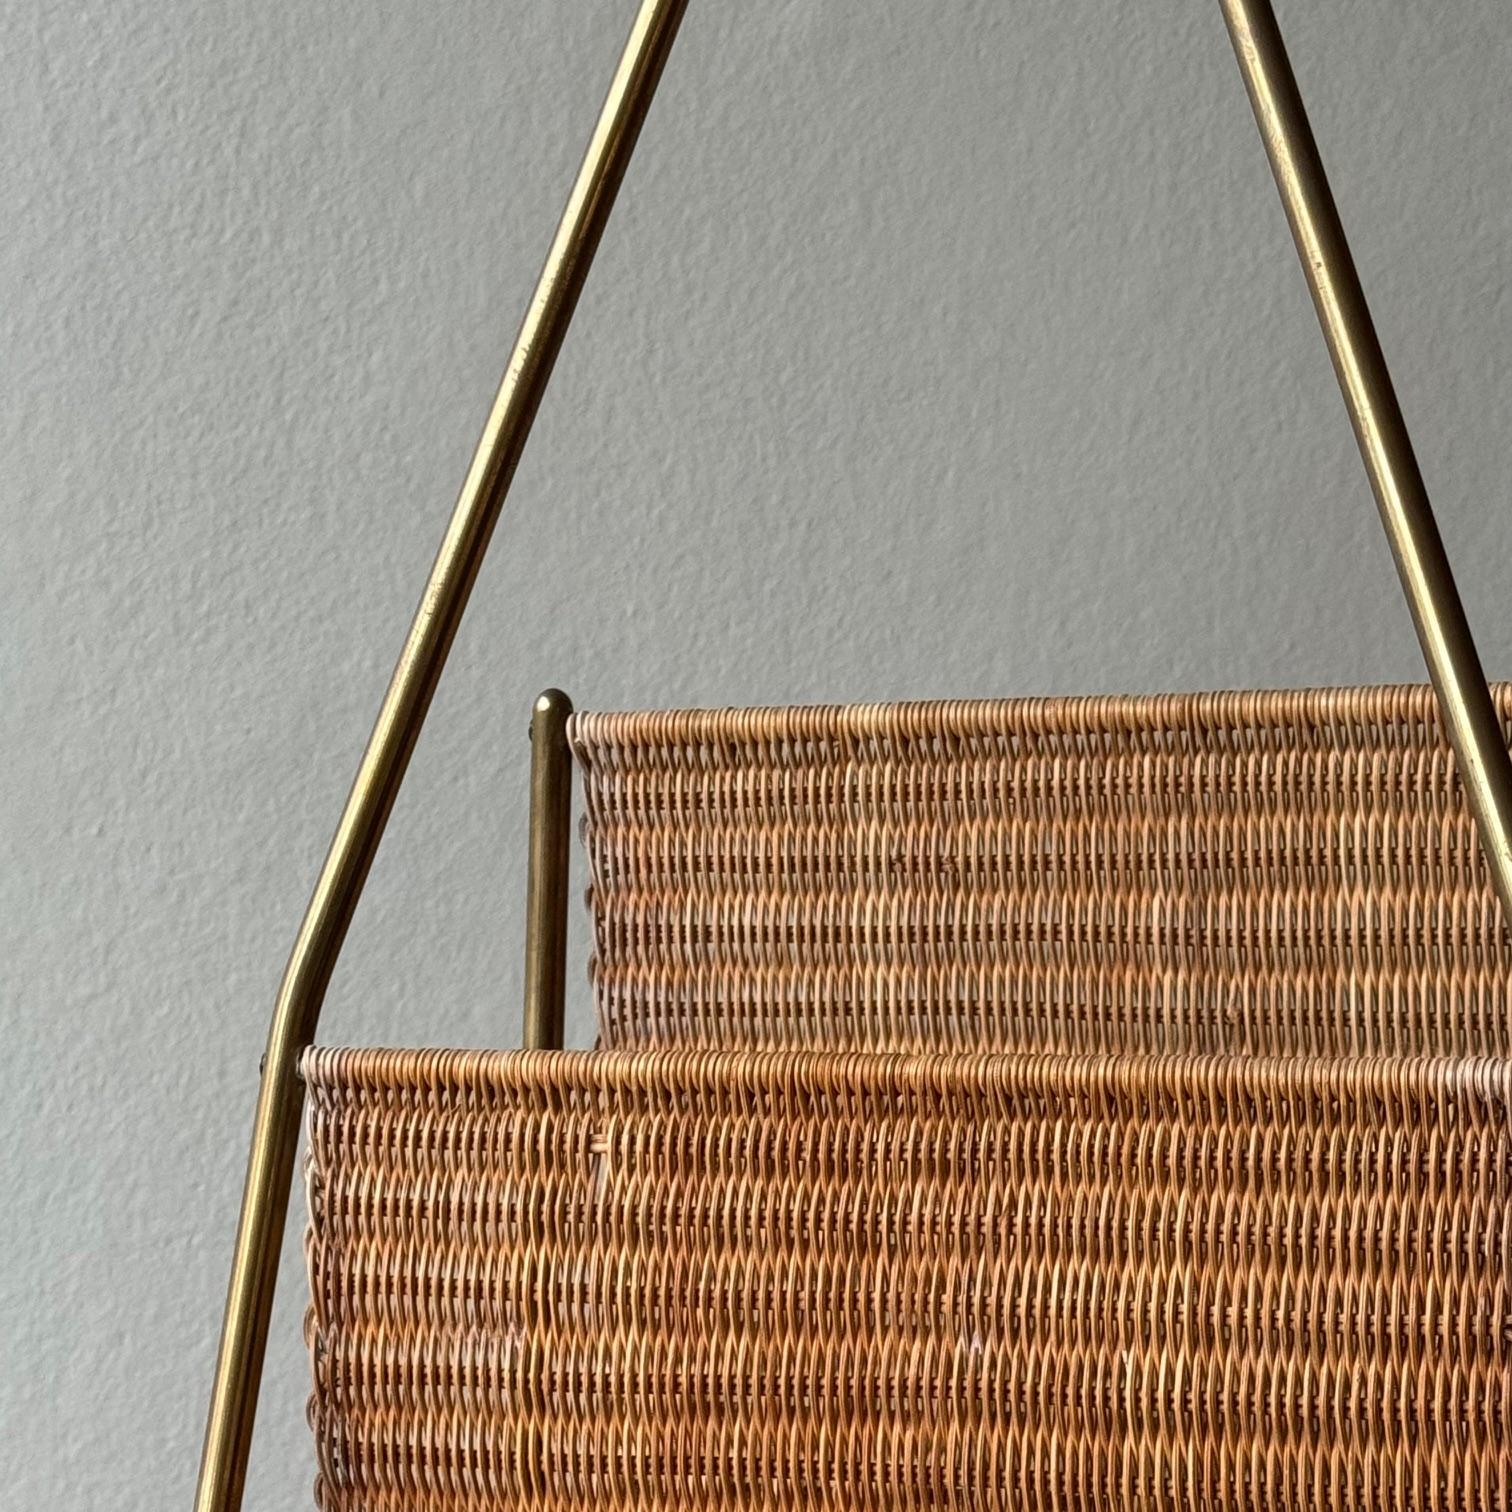 A wicker magazine rack designed by Carl Auböck II and made by the Carl Auböck workshop during the 1950s. The beautifully patinated frame of this brass magazine rack supports a tightly woven wicker sling large enough to hold a handful of magazines,